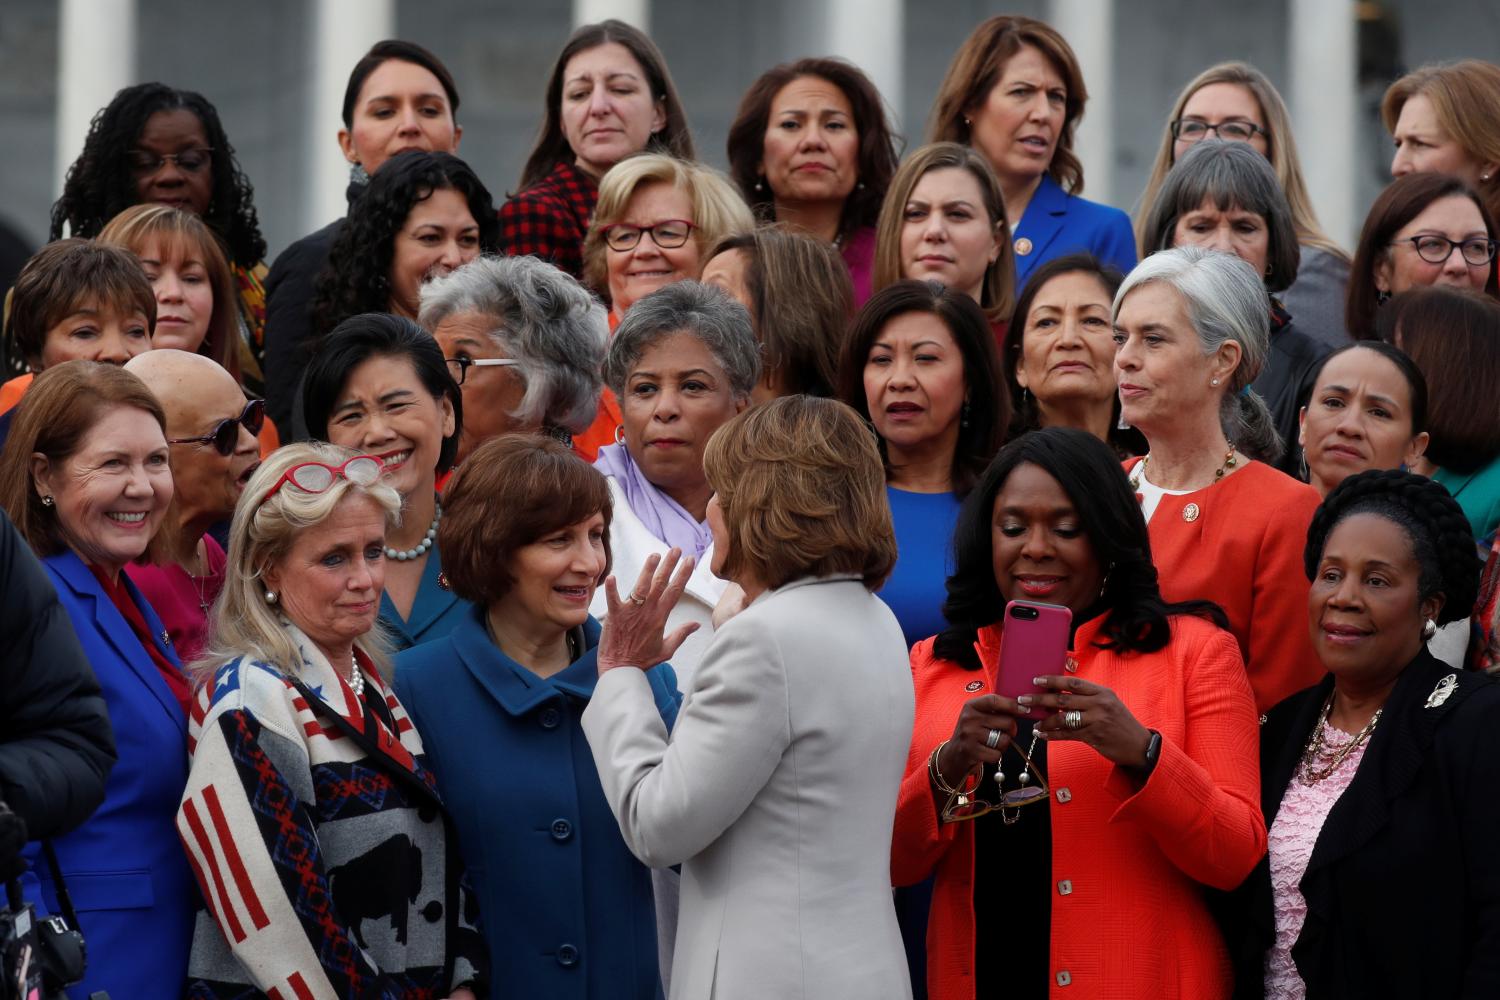 U.S. House Speaker Nancy Pelosi (D-CA) talks with House Democratic women during a photo opportunity on the second day of the new (116th) Congress on Capitol Hill in Washington, U.S., January 4, 2019. REUTERS/Leah Millis?? - RC1CC93812C0